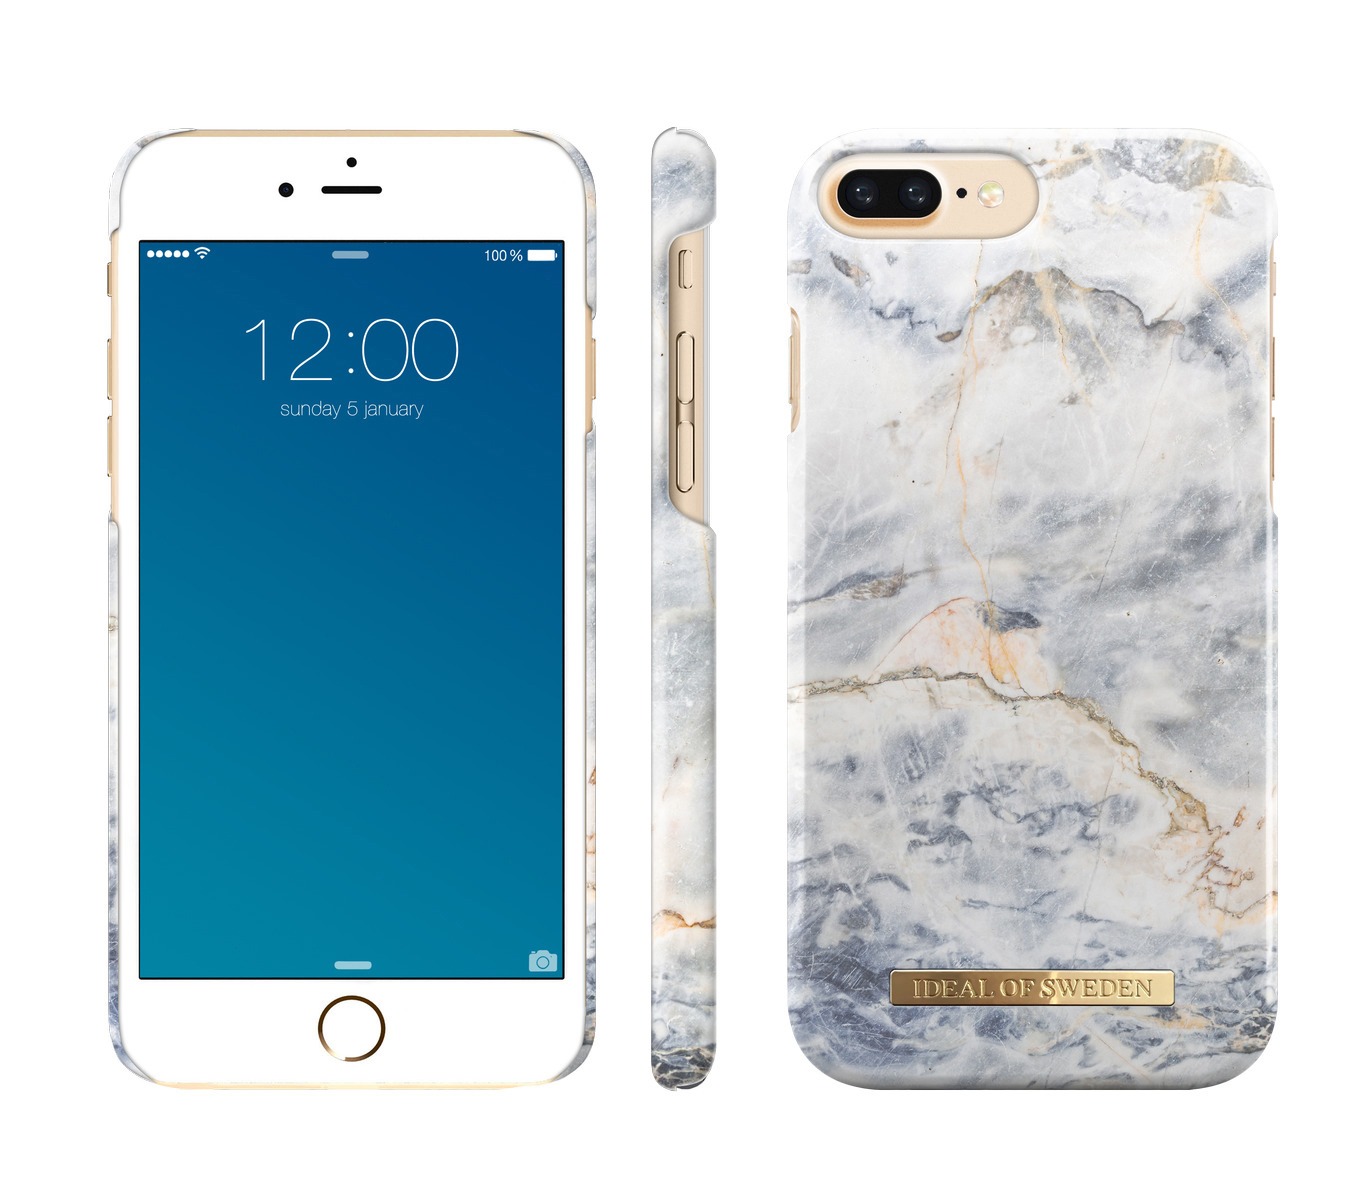 IDEAL OF 8 Marble iPhone Plus, iPhone Backcover, 7 Ocean Apple, Fashion, Plus ,iPhone 6 SWEDEN Plus